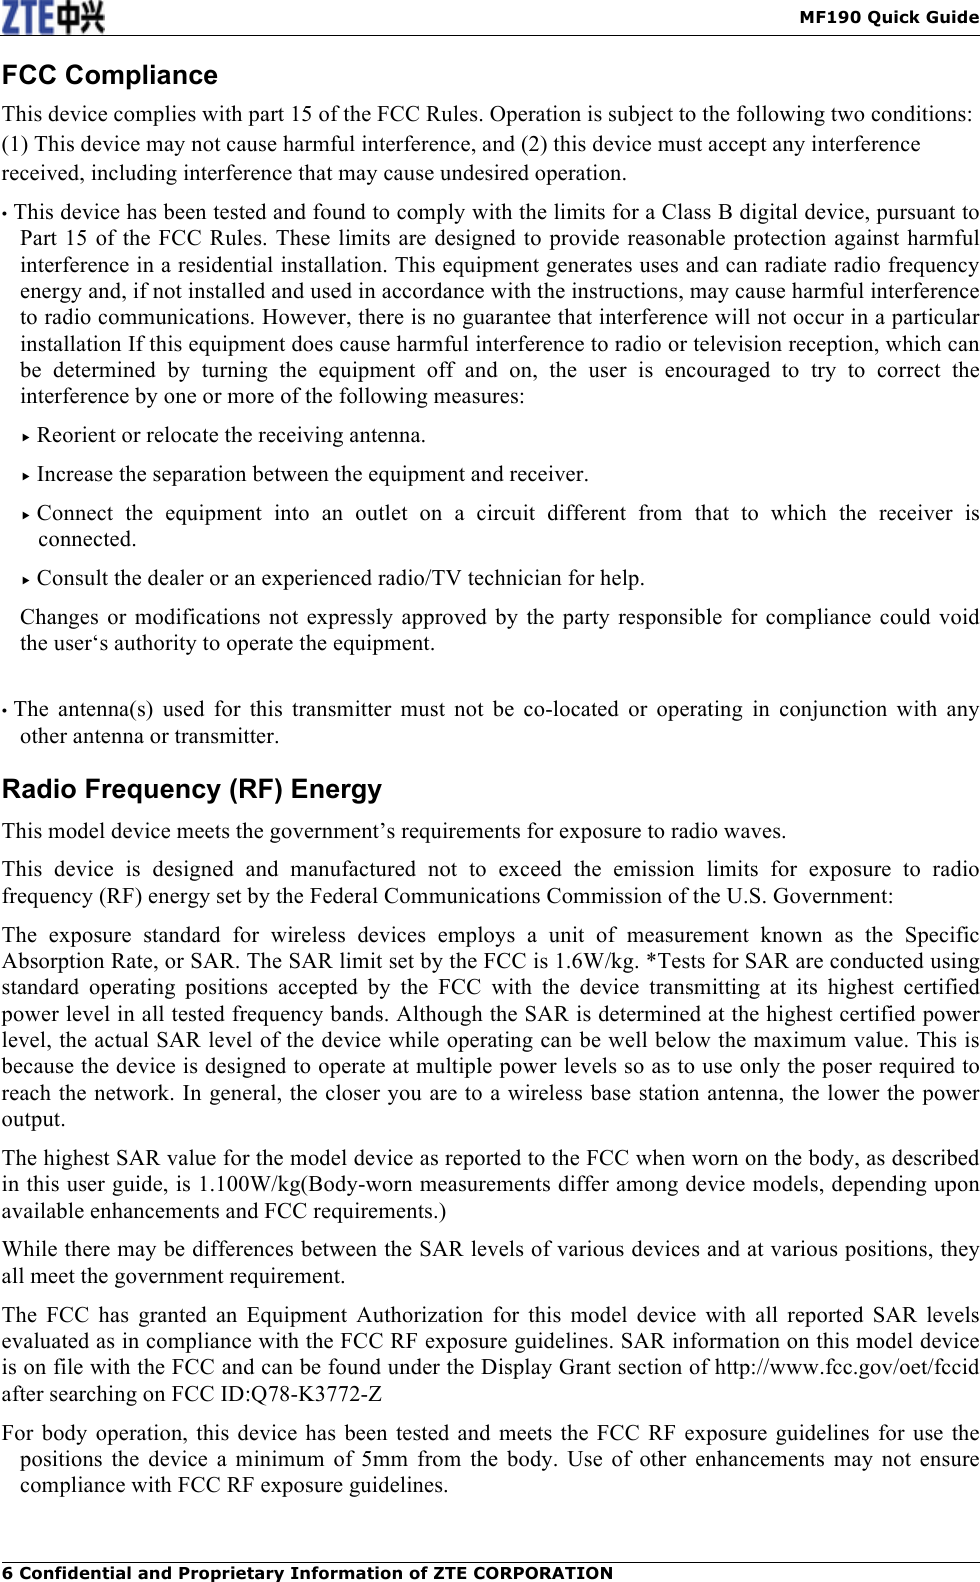   MF190 Quick Guide 6 Confidential and Proprietary Information of ZTE CORPORATION FCC Compliance This device complies with part 15 of the FCC Rules. Operation is subject to the following two conditions: (1) This device may not cause harmful interference, and (2) this device must accept any interference received, including interference that may cause undesired operation. • This device has been tested and found to comply with the limits for a Class B digital device, pursuant to Part 15 of the FCC Rules. These limits are designed to provide reasonable protection against harmful interference in a residential installation. This equipment generates uses and can radiate radio frequency energy and, if not installed and used in accordance with the instructions, may cause harmful interference to radio communications. However, there is no guarantee that interference will not occur in a particular installation If this equipment does cause harmful interference to radio or television reception, which can be  determined  by  turning  the  equipment  off  and  on,  the  user  is  encouraged  to  try  to  correct  the interference by one or more of the following measures:  Reorient or relocate the receiving antenna.  Increase the separation between the equipment and receiver.  Connect  the  equipment  into  an  outlet  on  a  circuit  different  from  that  to  which  the  receiver  is connected.  Consult the dealer or an experienced radio/TV technician for help. Changes or modifications not expressly approved by  the party responsible for  compliance  could  void the user‘s authority to operate the equipment.  • The  antenna(s)  used  for  this  transmitter  must  not  be  co-located  or  operating  in  conjunction  with  any other antenna or transmitter. Radio Frequency (RF) Energy This model device meets the government’s requirements for exposure to radio waves. This  device  is  designed  and  manufactured  not  to  exceed  the  emission  limits  for  exposure  to  radio frequency (RF) energy set by the Federal Communications Commission of the U.S. Government: The  exposure  standard  for  wireless  devices  employs  a  unit  of  measurement  known  as  the  Specific Absorption Rate, or SAR. The SAR limit set by the FCC is 1.6W/kg. *Tests for SAR are conducted using standard  operating positions  accepted  by  the  FCC  with  the  device  transmitting  at  its  highest  certified power level in all tested frequency bands. Although the SAR is determined at the highest certified power level, the actual SAR level of the device while operating can be well below the maximum value. This is because the device is designed to operate at multiple power levels so as to use only the poser required to reach the network. In general, the closer you are to a wireless base station antenna, the lower the power output. The highest SAR value for the model device as reported to the FCC when worn on the body, as described in this user guide, is 1.100W/kg(Body-worn measurements differ among device models, depending upon available enhancements and FCC requirements.) While there may be differences between the SAR levels of various devices and at various positions, they all meet the government requirement. The  FCC  has  granted  an  Equipment  Authorization  for  this  model  device  with  all  reported  SAR  levels evaluated as in compliance with the FCC RF exposure guidelines. SAR information on this model device is on file with the FCC and can be found under the Display Grant section of http://www.fcc.gov/oet/fccid after searching on FCC ID:Q78-K3772-Z For body  operation, this device has been tested and  meets the FCC  RF  exposure  guidelines for use the positions the  device  a  minimum  of  5mm from  the  body.  Use  of  other  enhancements  may  not  ensure compliance with FCC RF exposure guidelines.  